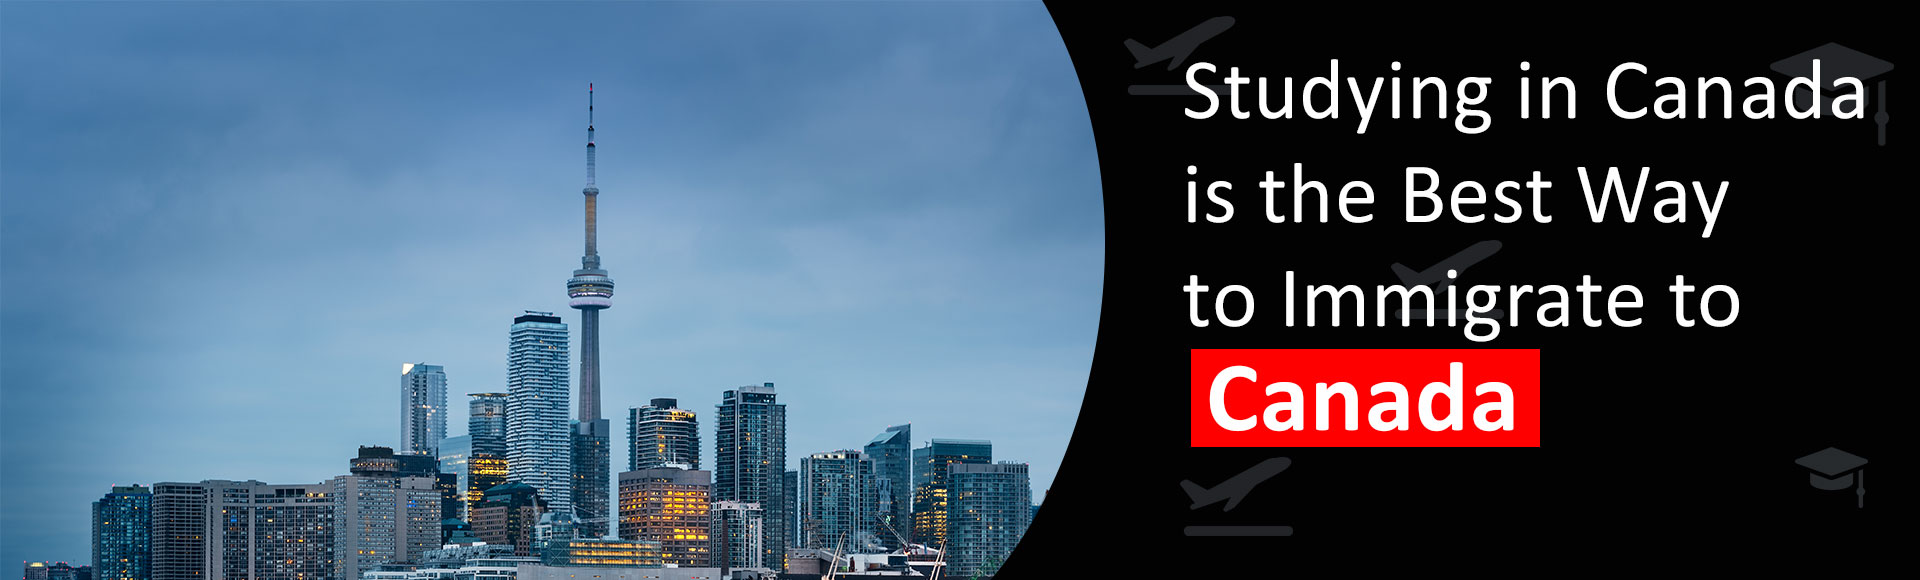 Studying in Canada is the Best Way to Immigrate to Canada